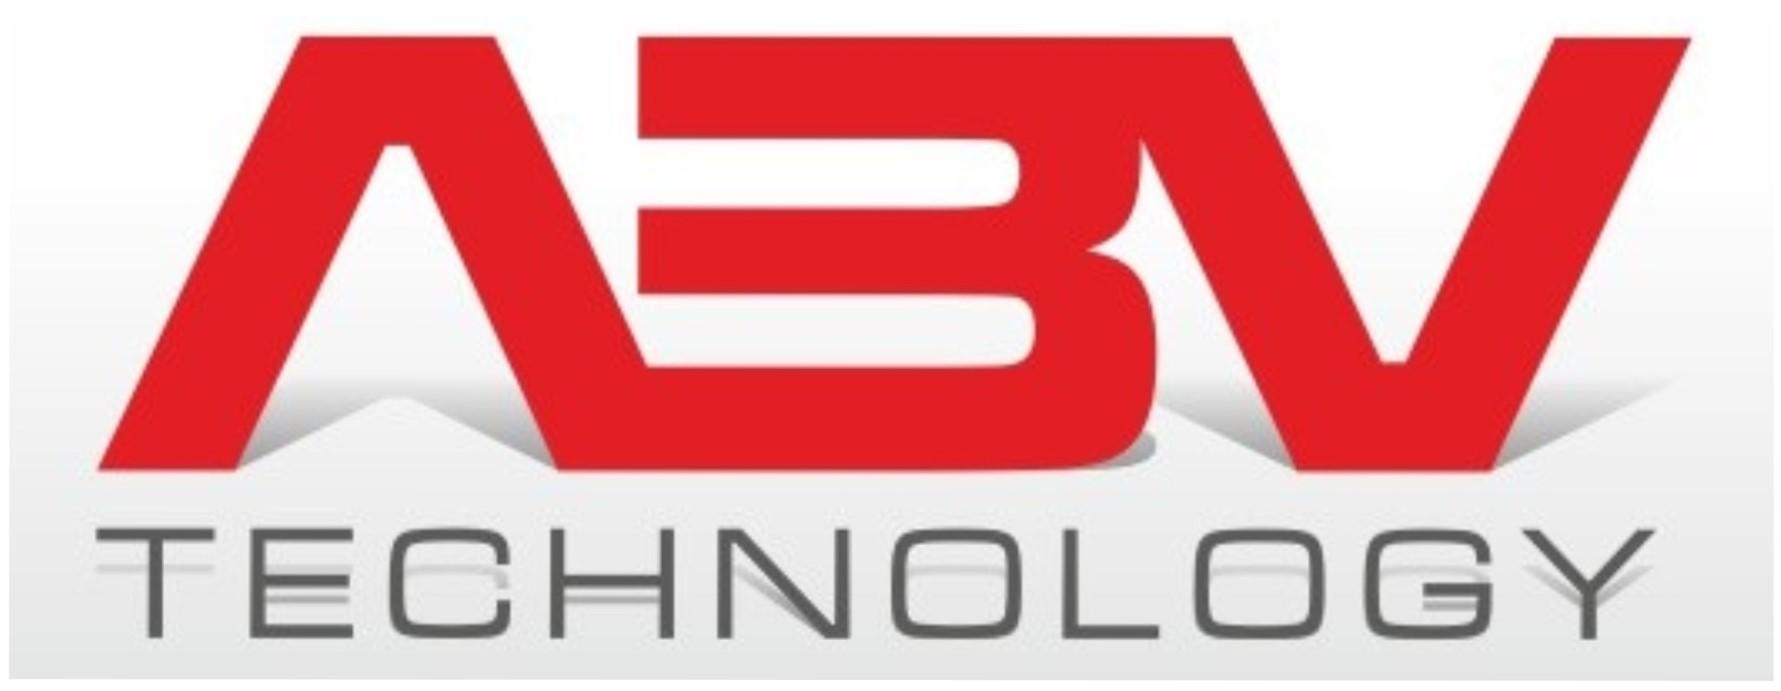 ABV Technology security systems